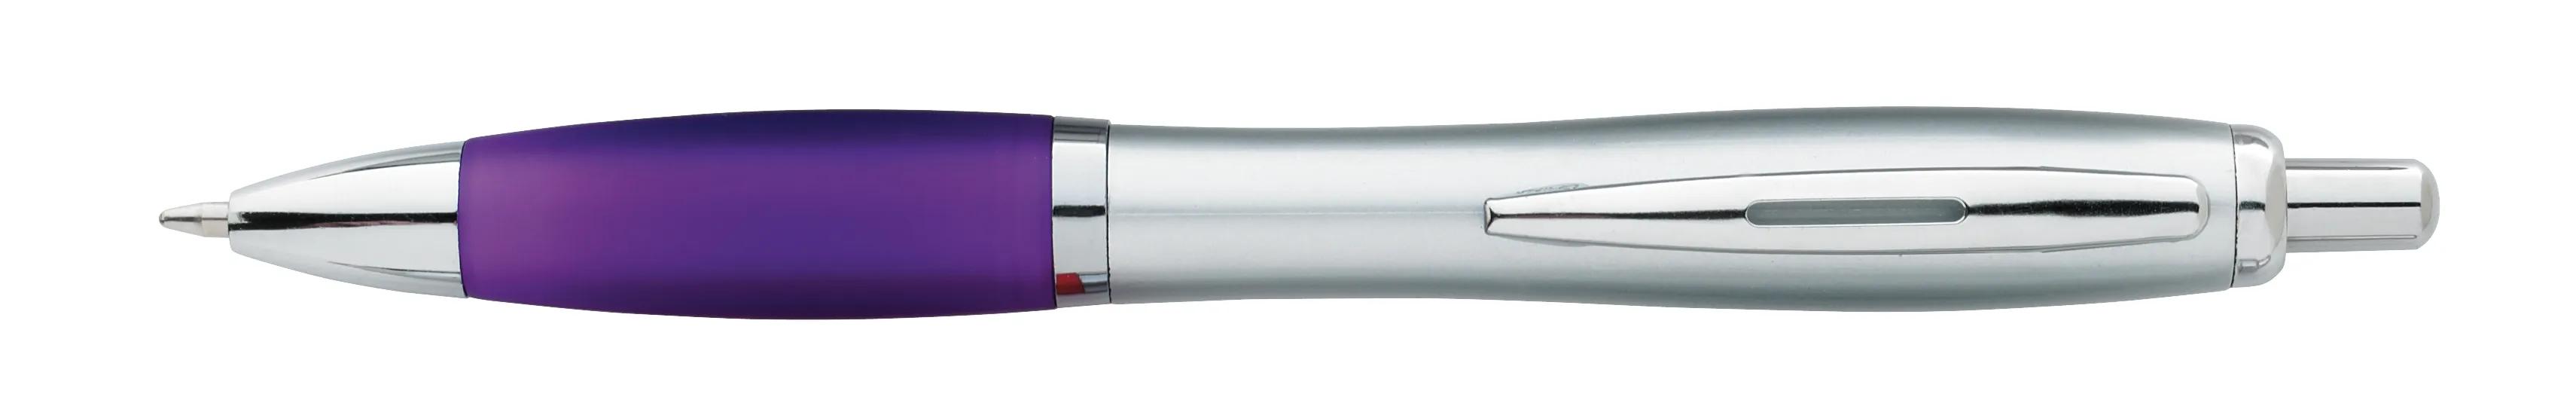 Ion Silver Pen 12 of 43